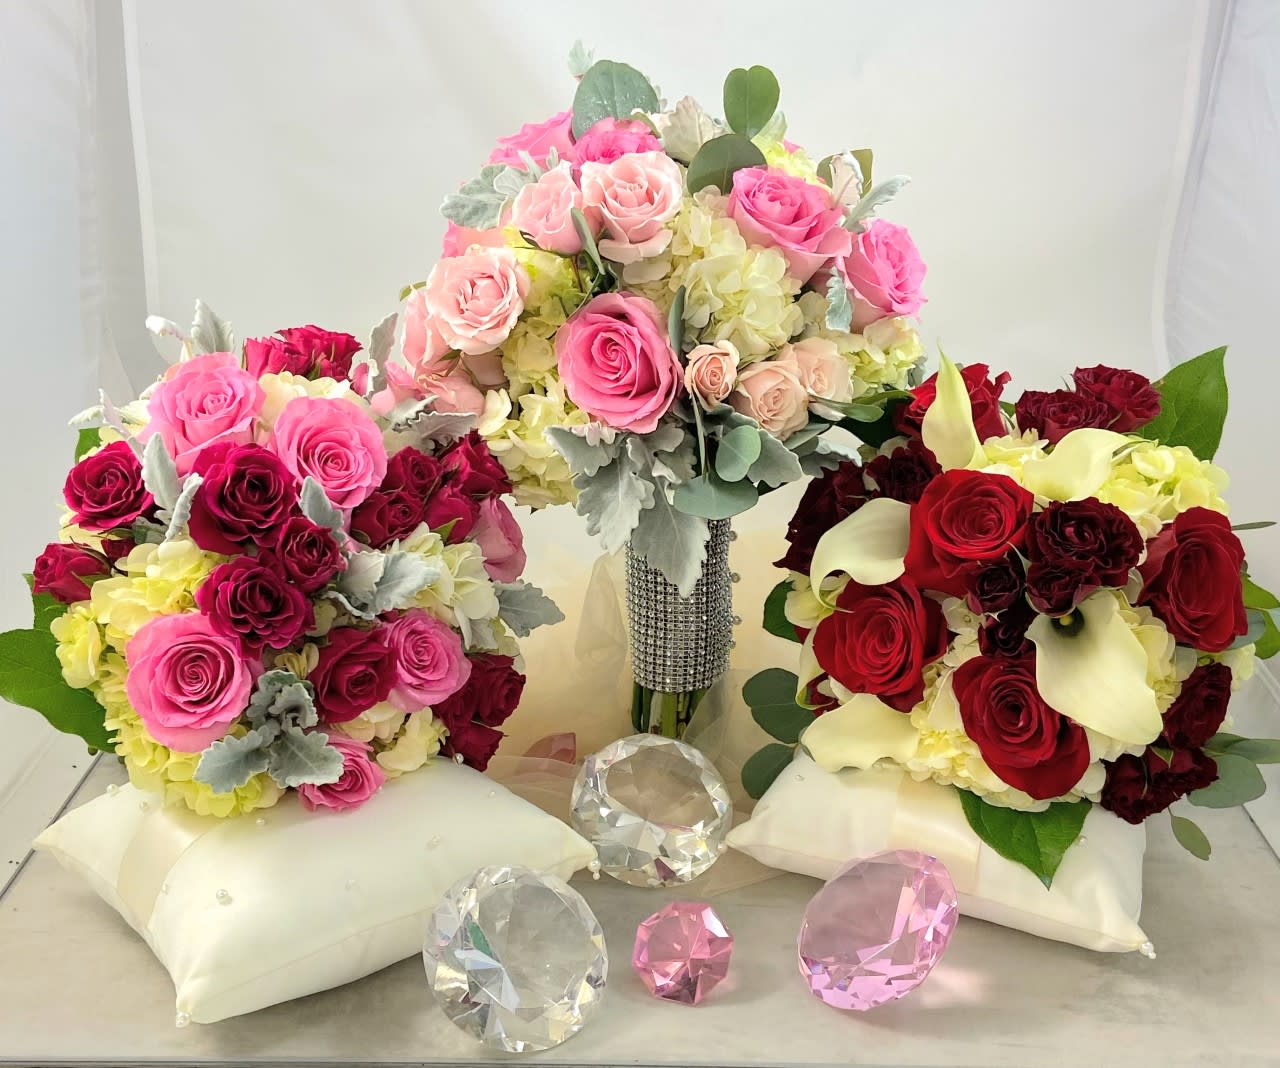 Prom Bouquets - Prom season is upon us and these bouquets are perfect for the occasion. No matter the color dress we can make a bouquet that will accent the look perfectly.  